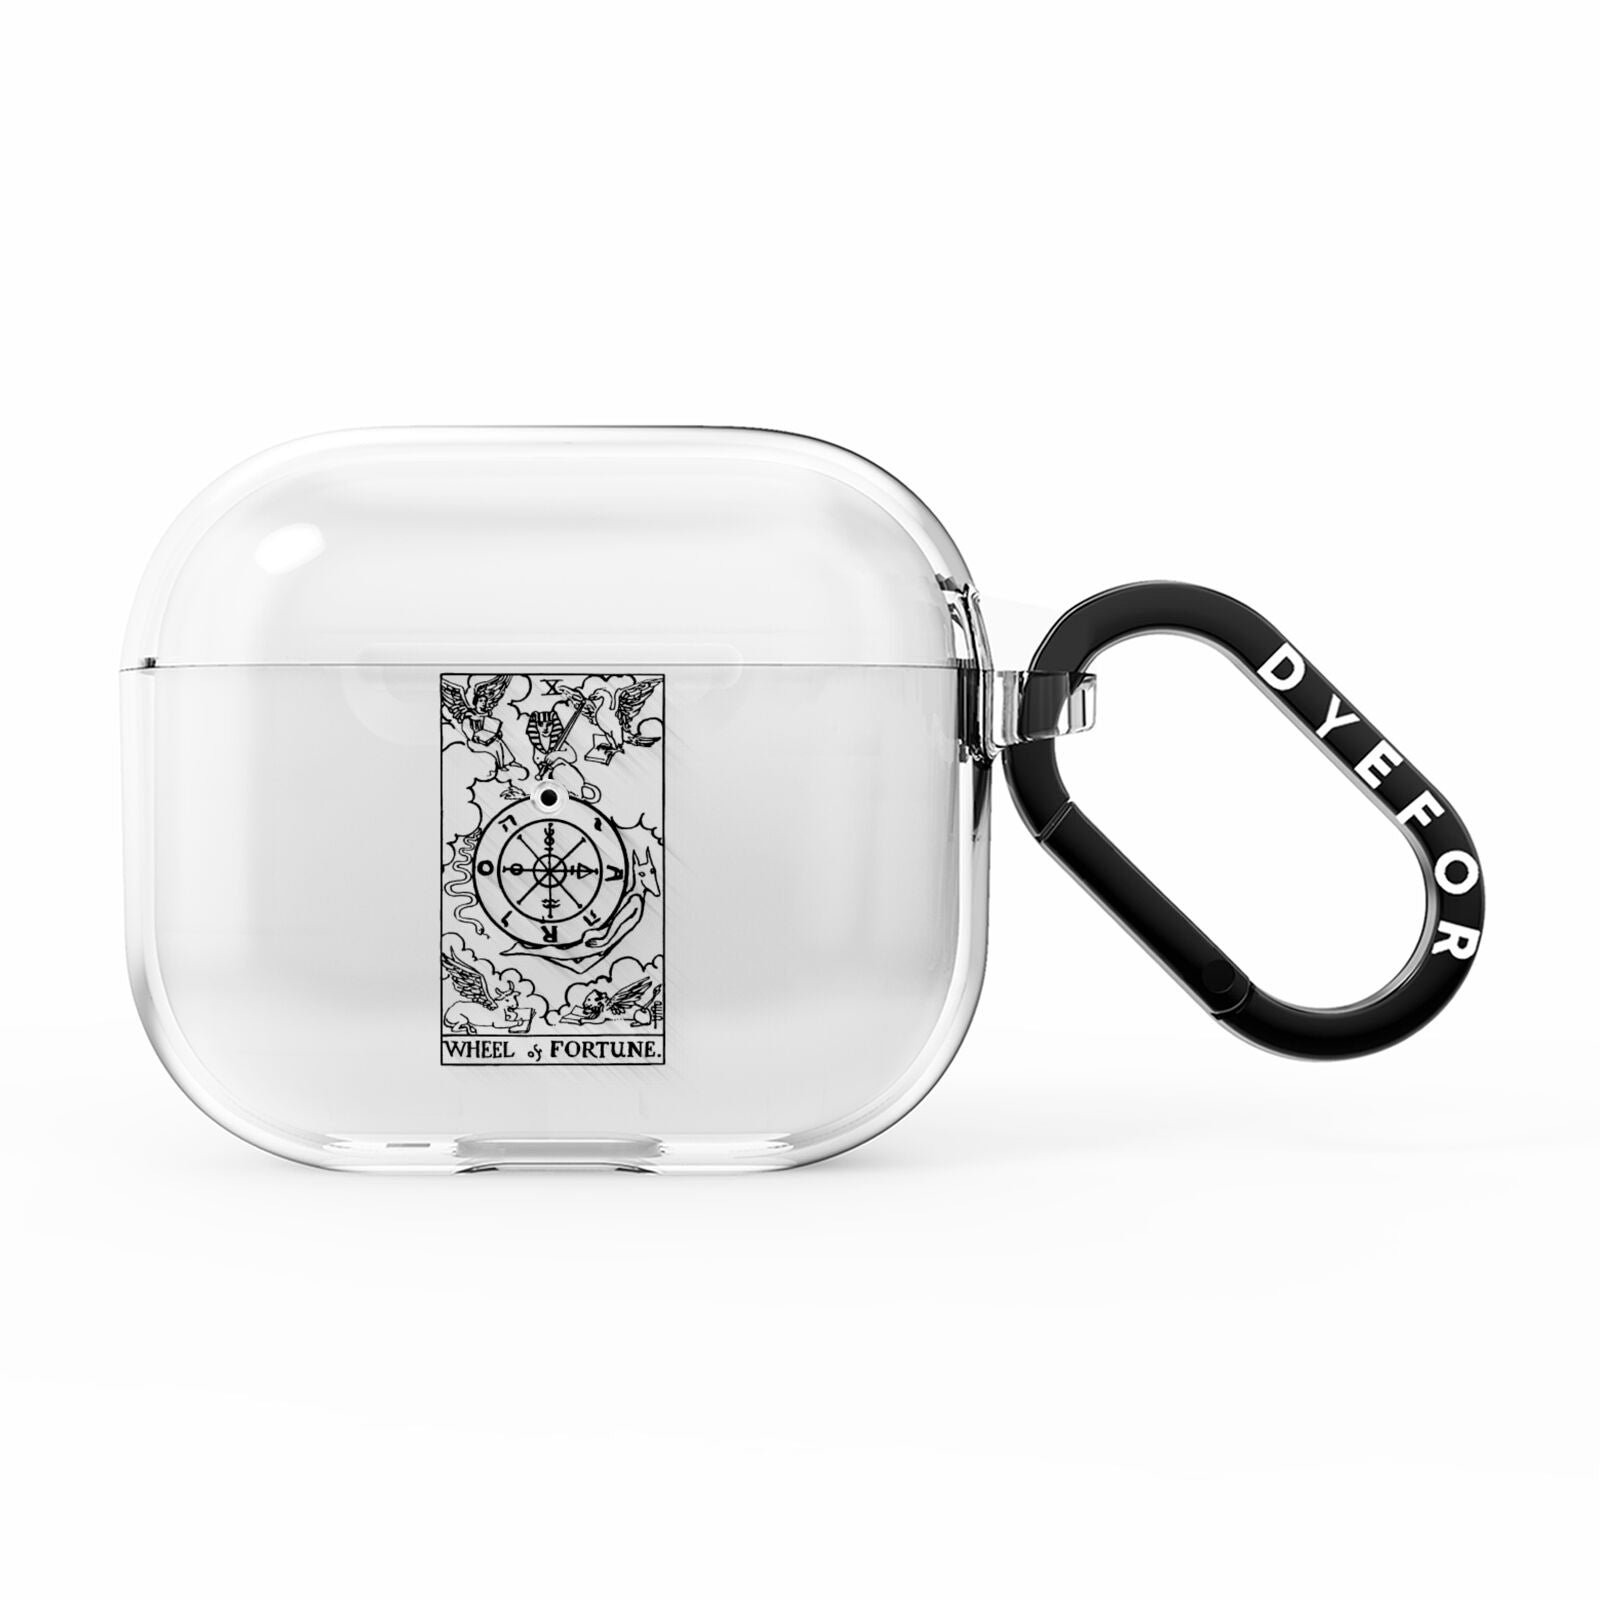 Wheel of Fortune Monochrome Tarot Card AirPods Clear Case 3rd Gen